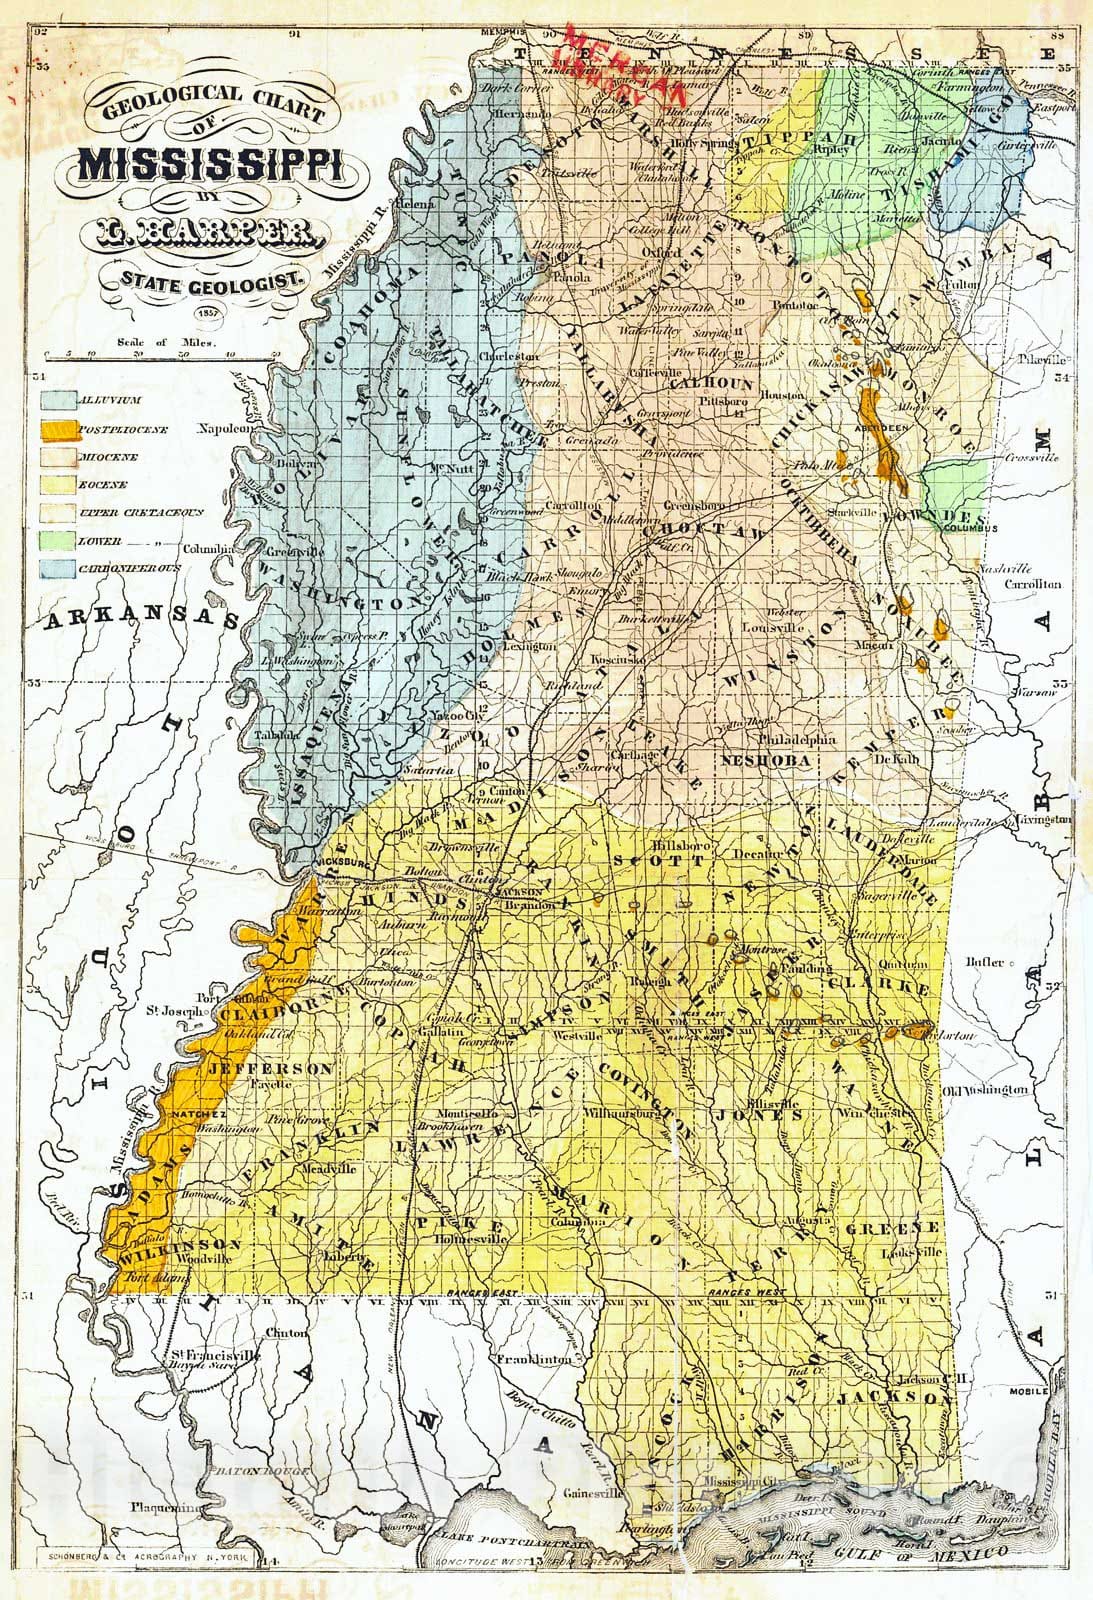 Historic Map : 1857 Geological Chart of Mississippi (from Preliminary Report on the Geology and Agriculture of the State of Mississippi) : Vintage Wall Art